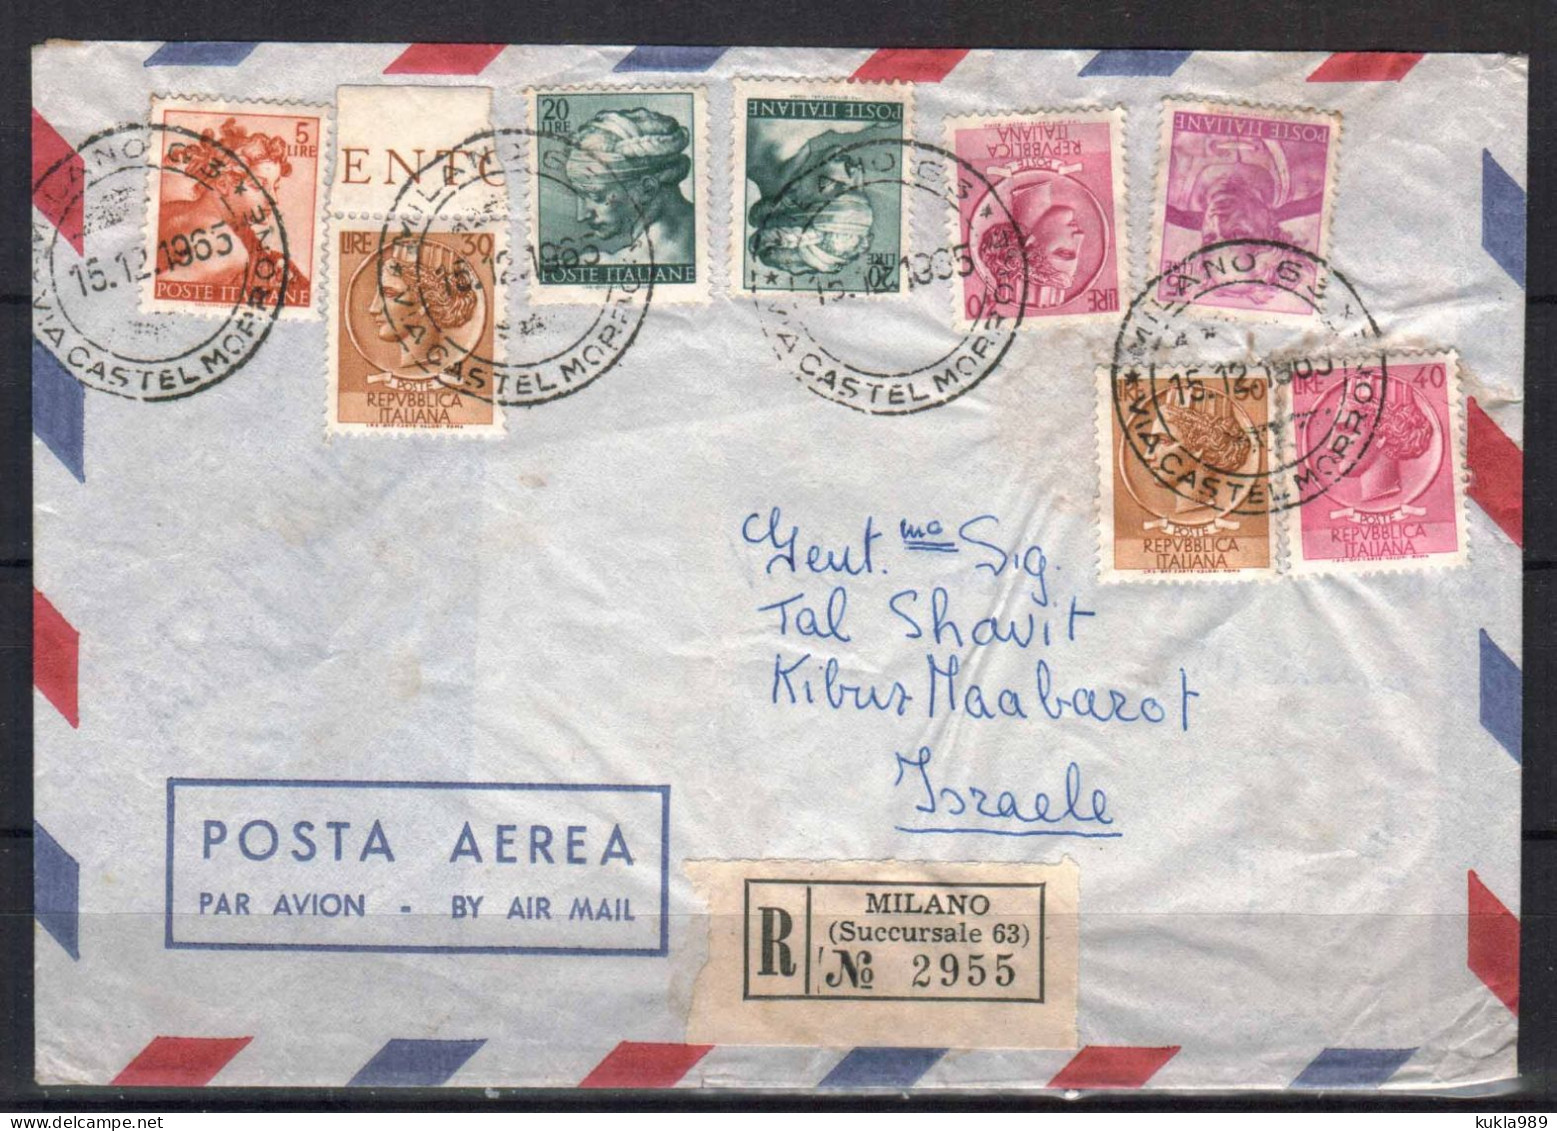 ITALY STAMPS. 1965 REG. COVER TO ISRAEL - Airmail